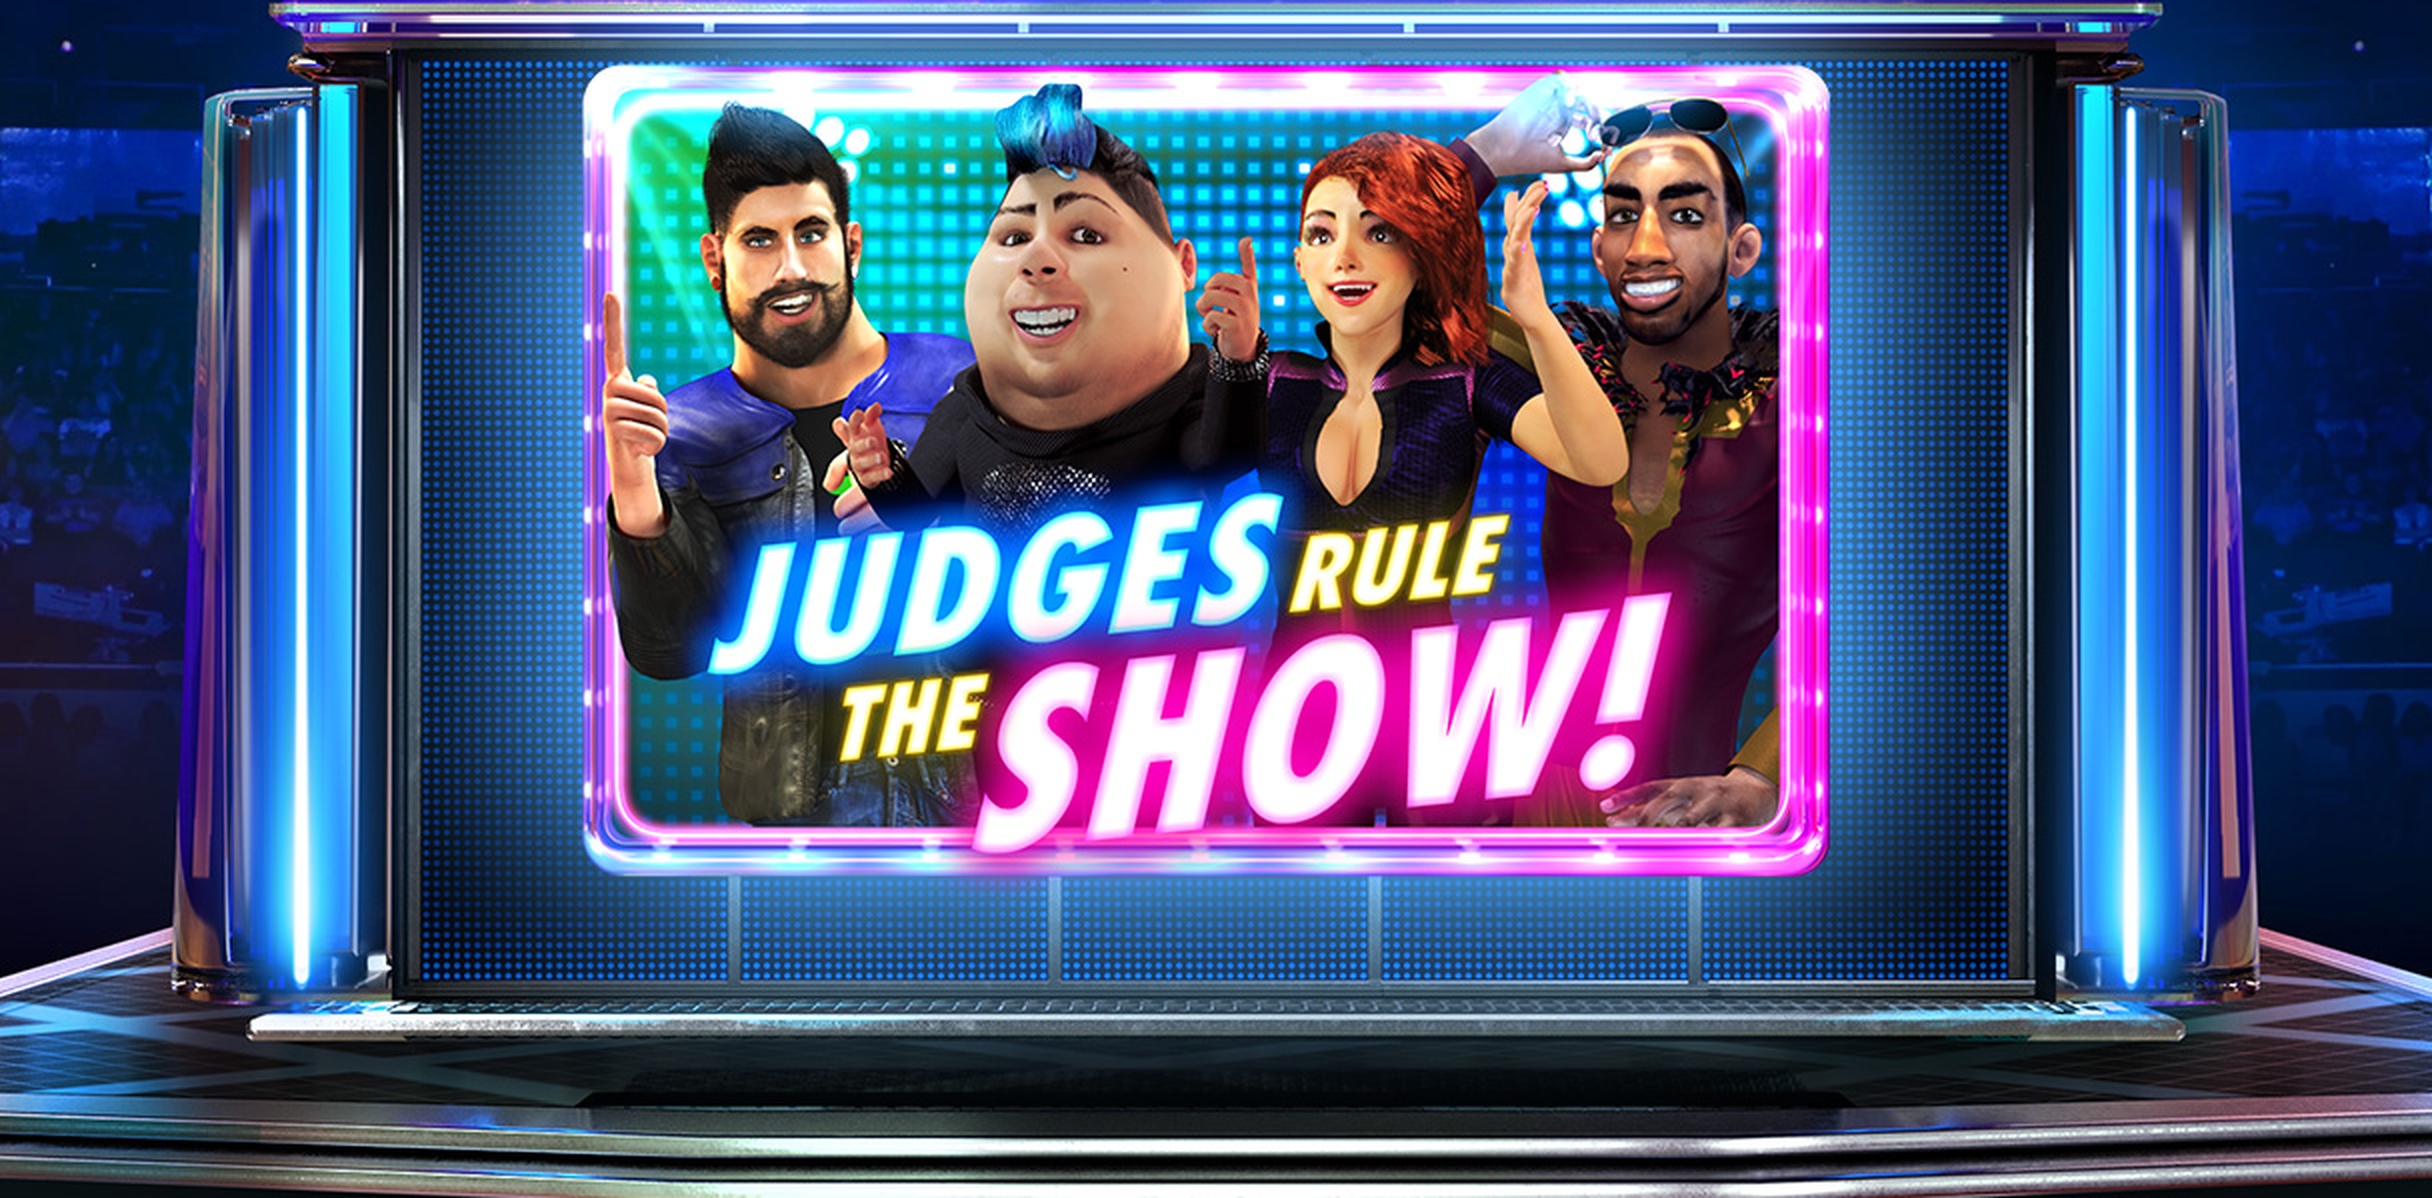 Judges Rule The Show! demo